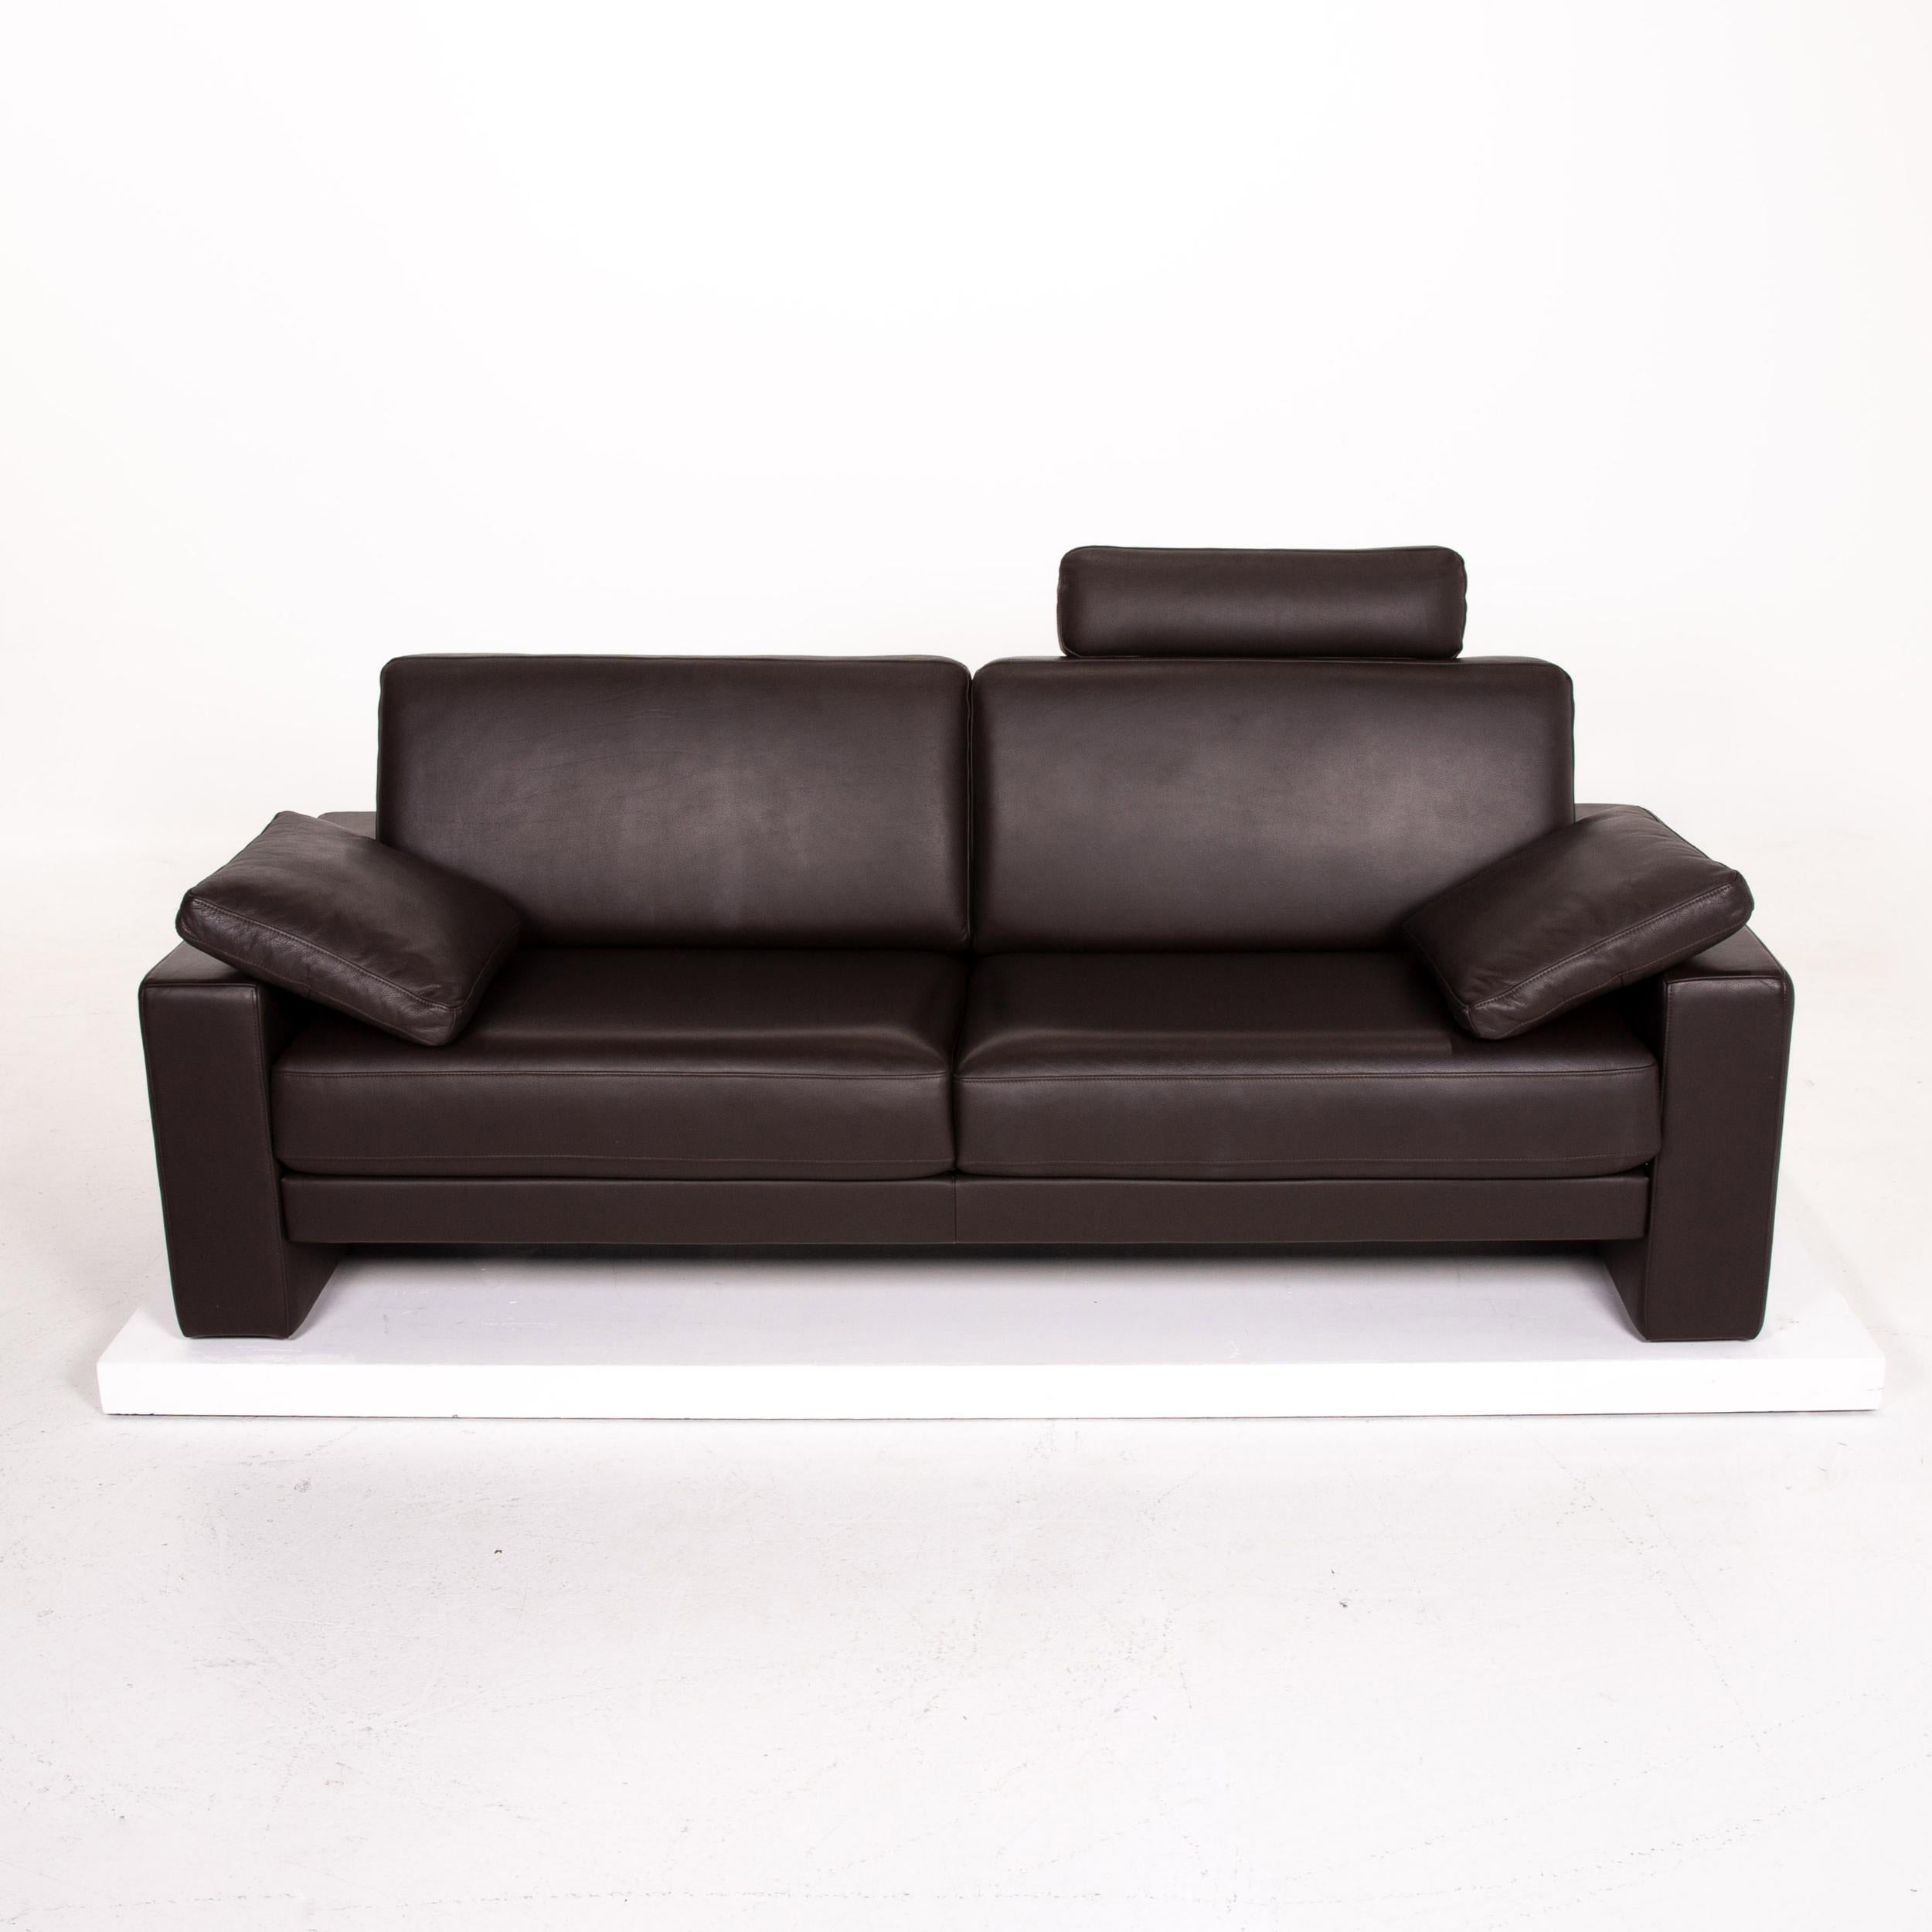 Rolf Benz Ego Leather Sofa Dark Brown Three-Seat Couch In Excellent Condition For Sale In Cologne, DE